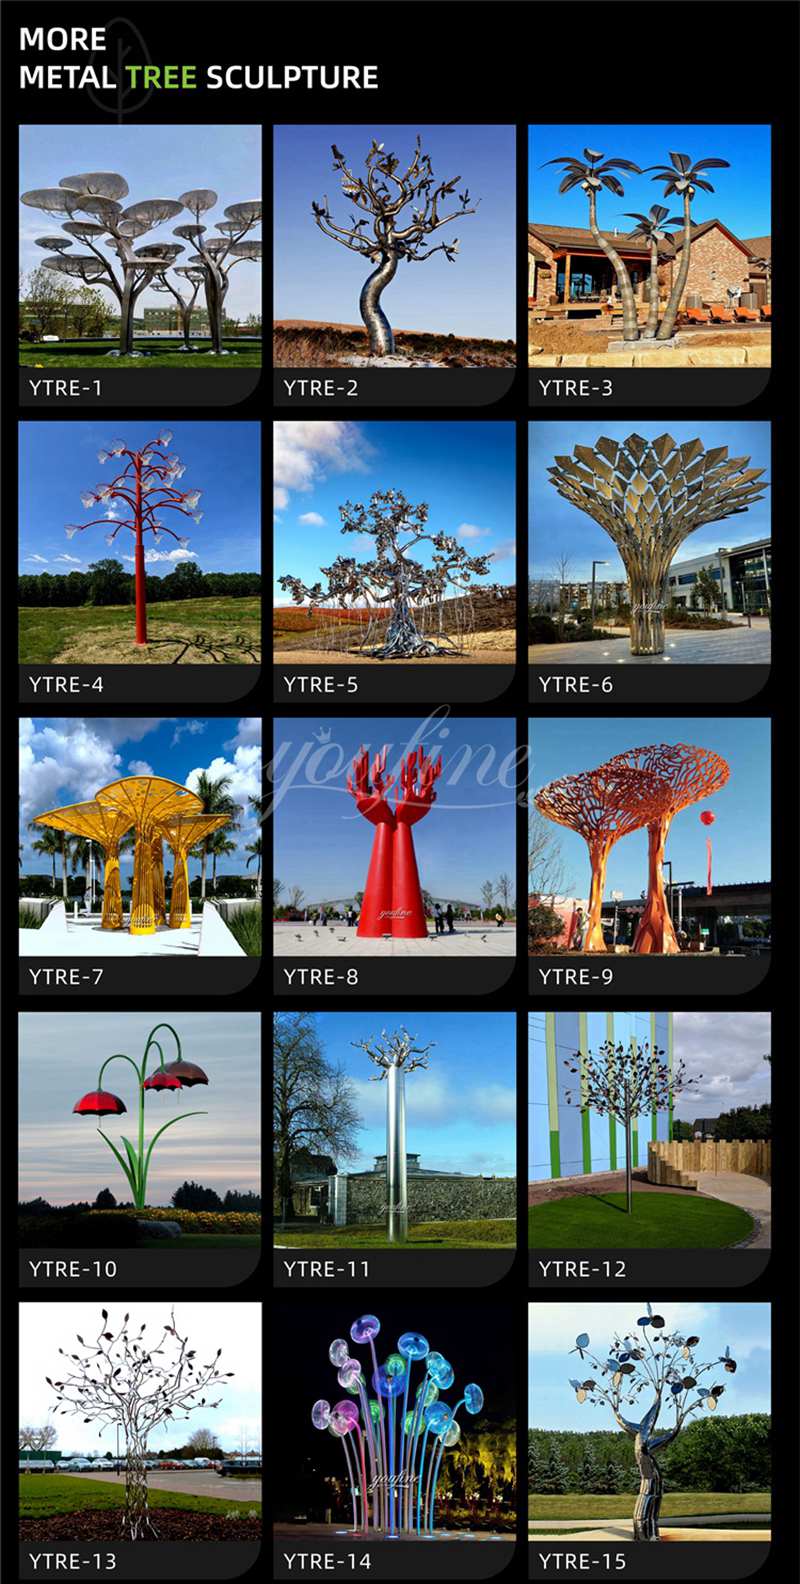 More Stainless Steel Tree Sculptures